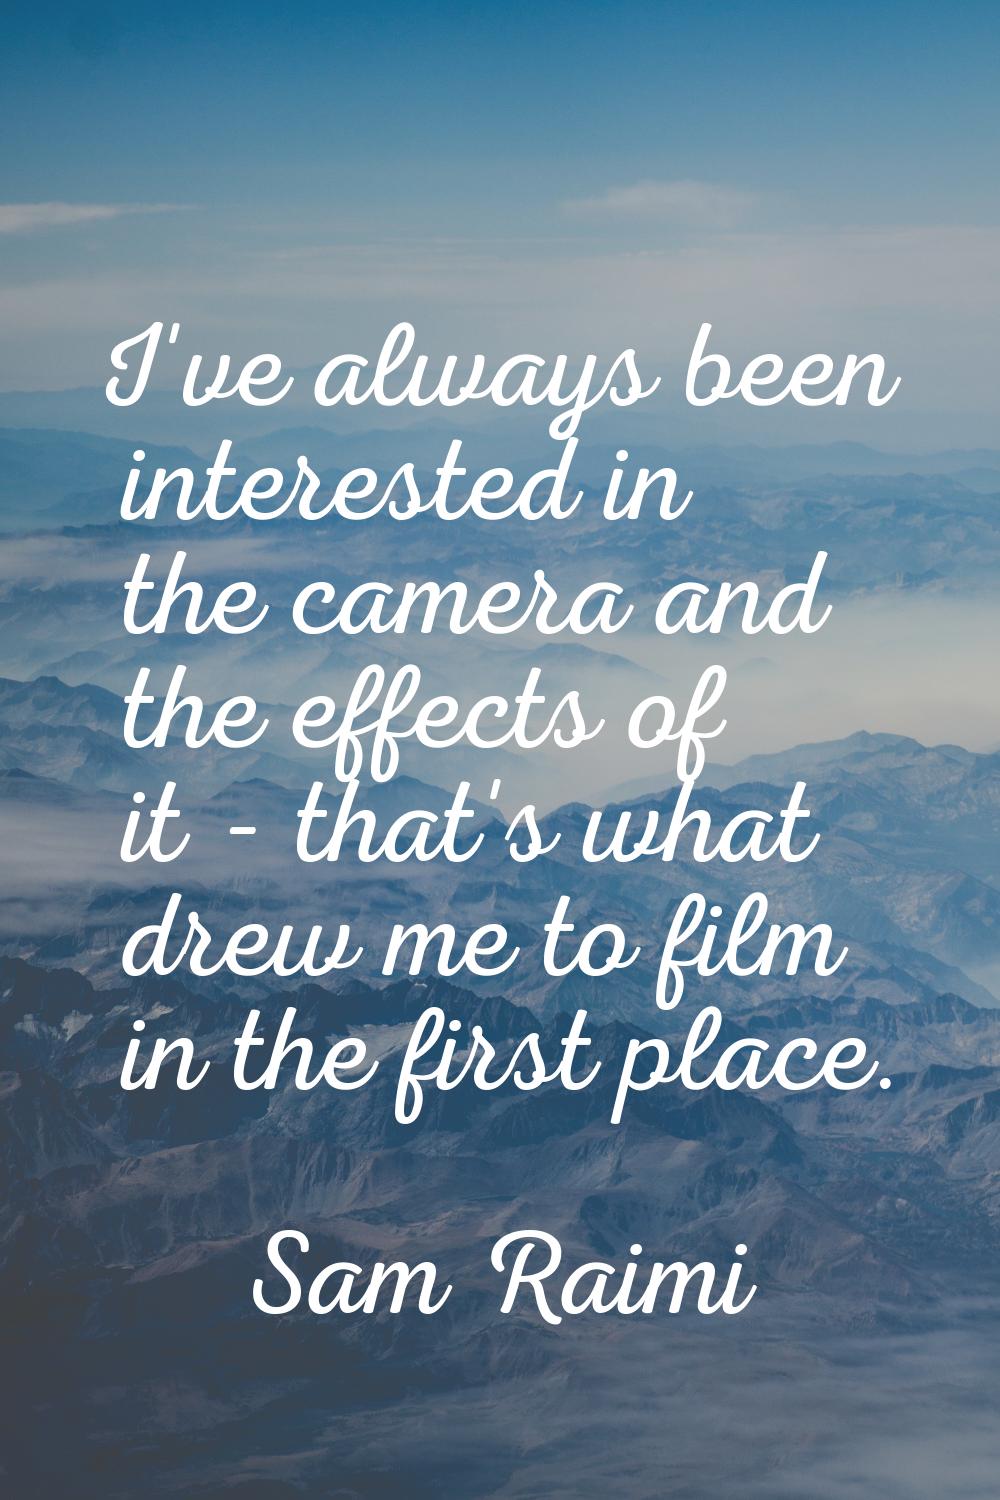 I've always been interested in the camera and the effects of it - that's what drew me to film in th